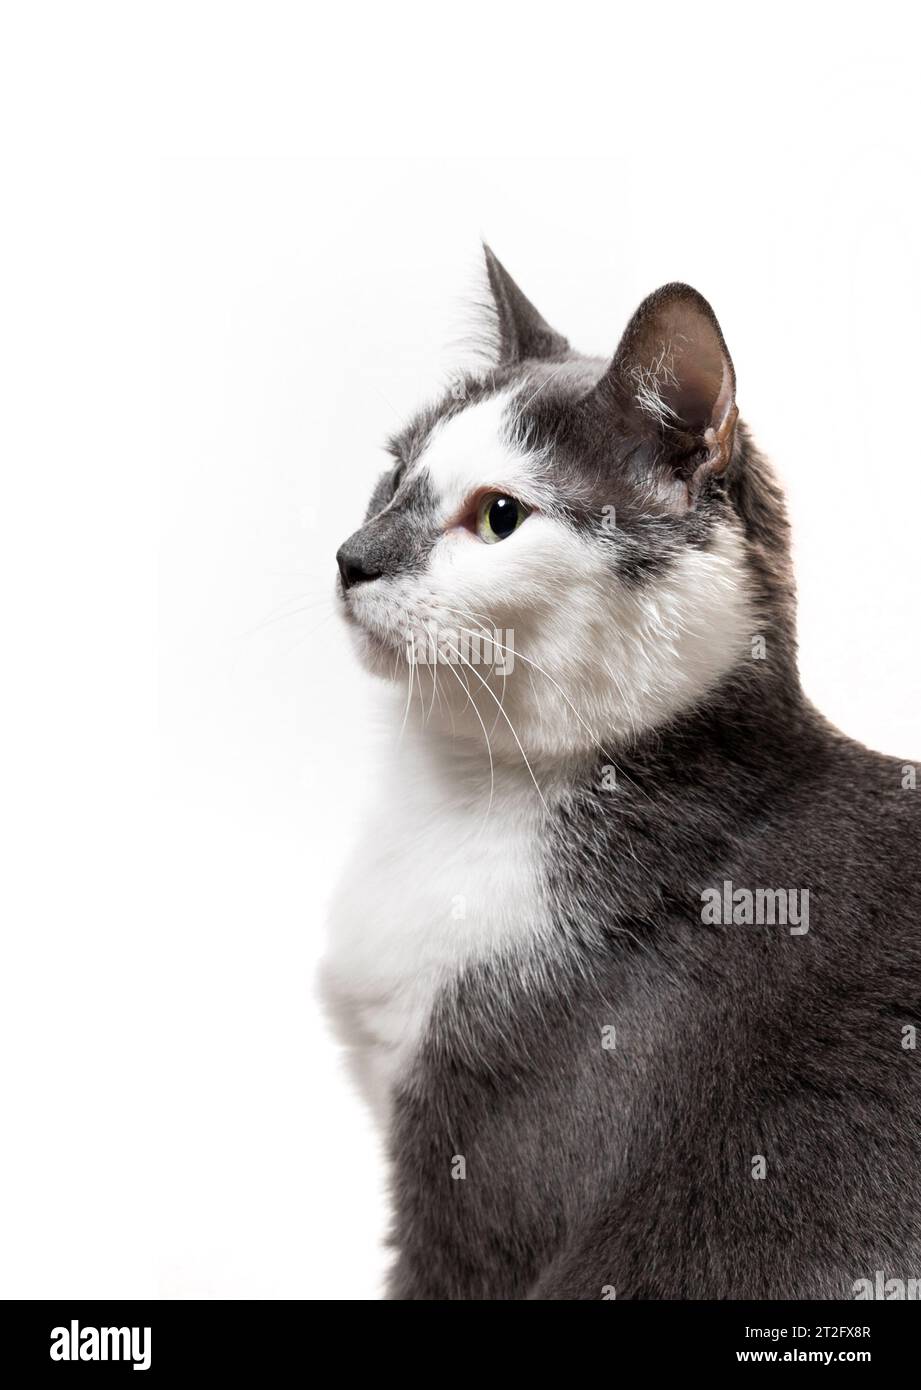 gray and white cat posing for a photo in a studio Stock Photo